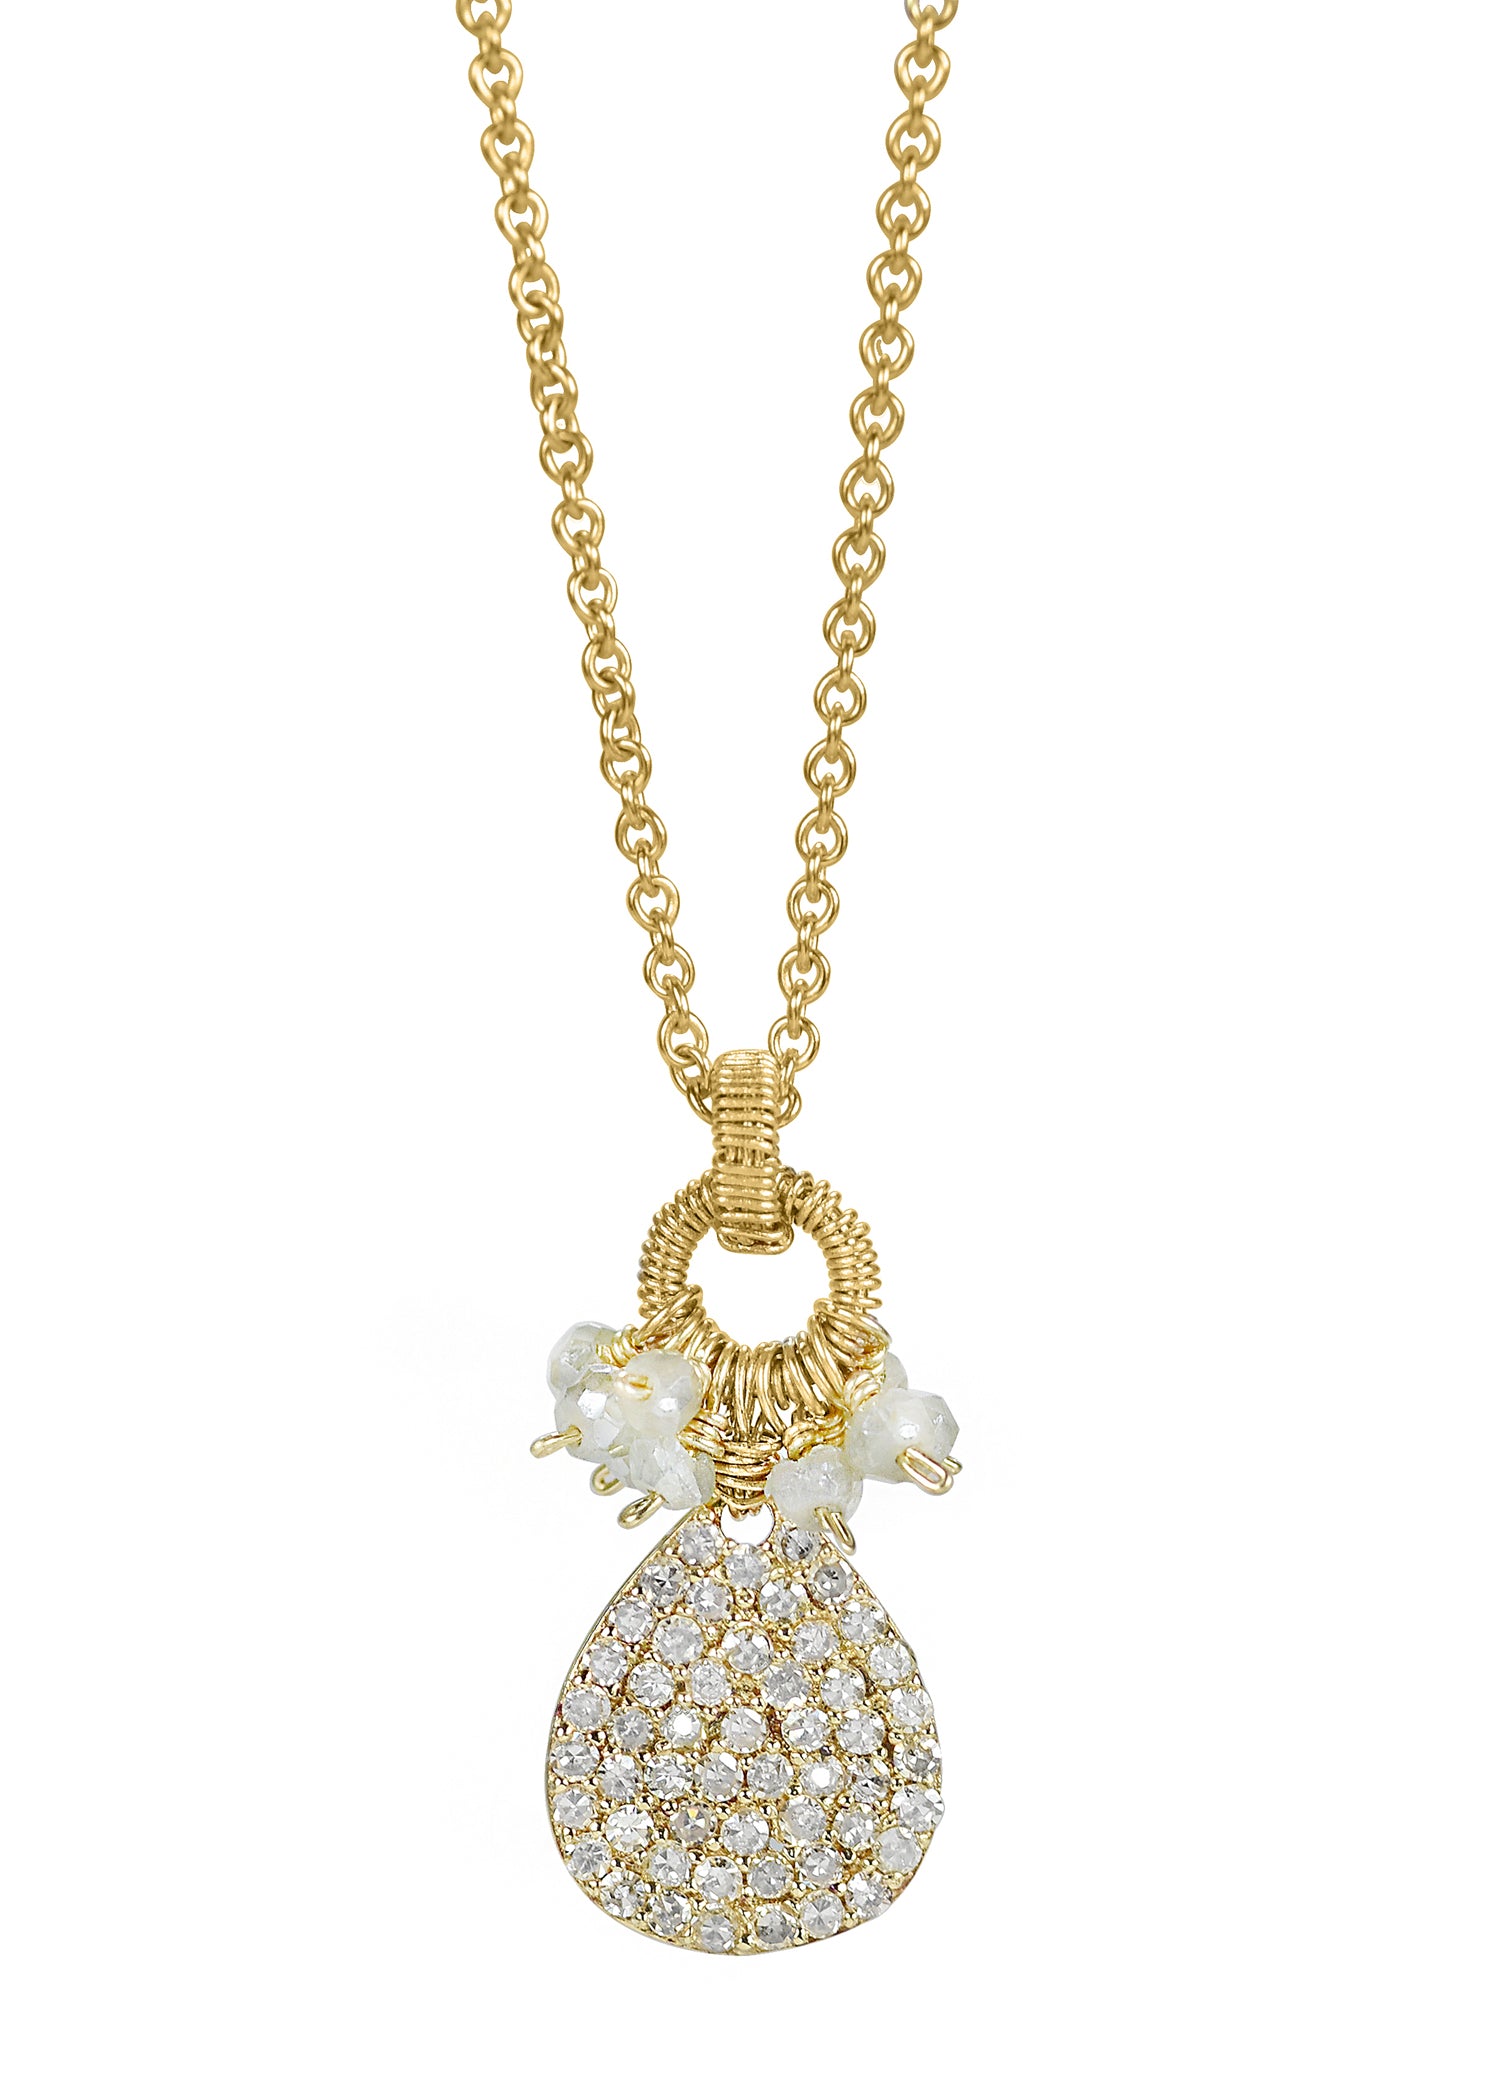 Diamond Silverite 14k gold Necklace measures 16" in length Pendant measures 3/4" in length and 3/8" in width at the widest point Handmade in our Los Angeles studio